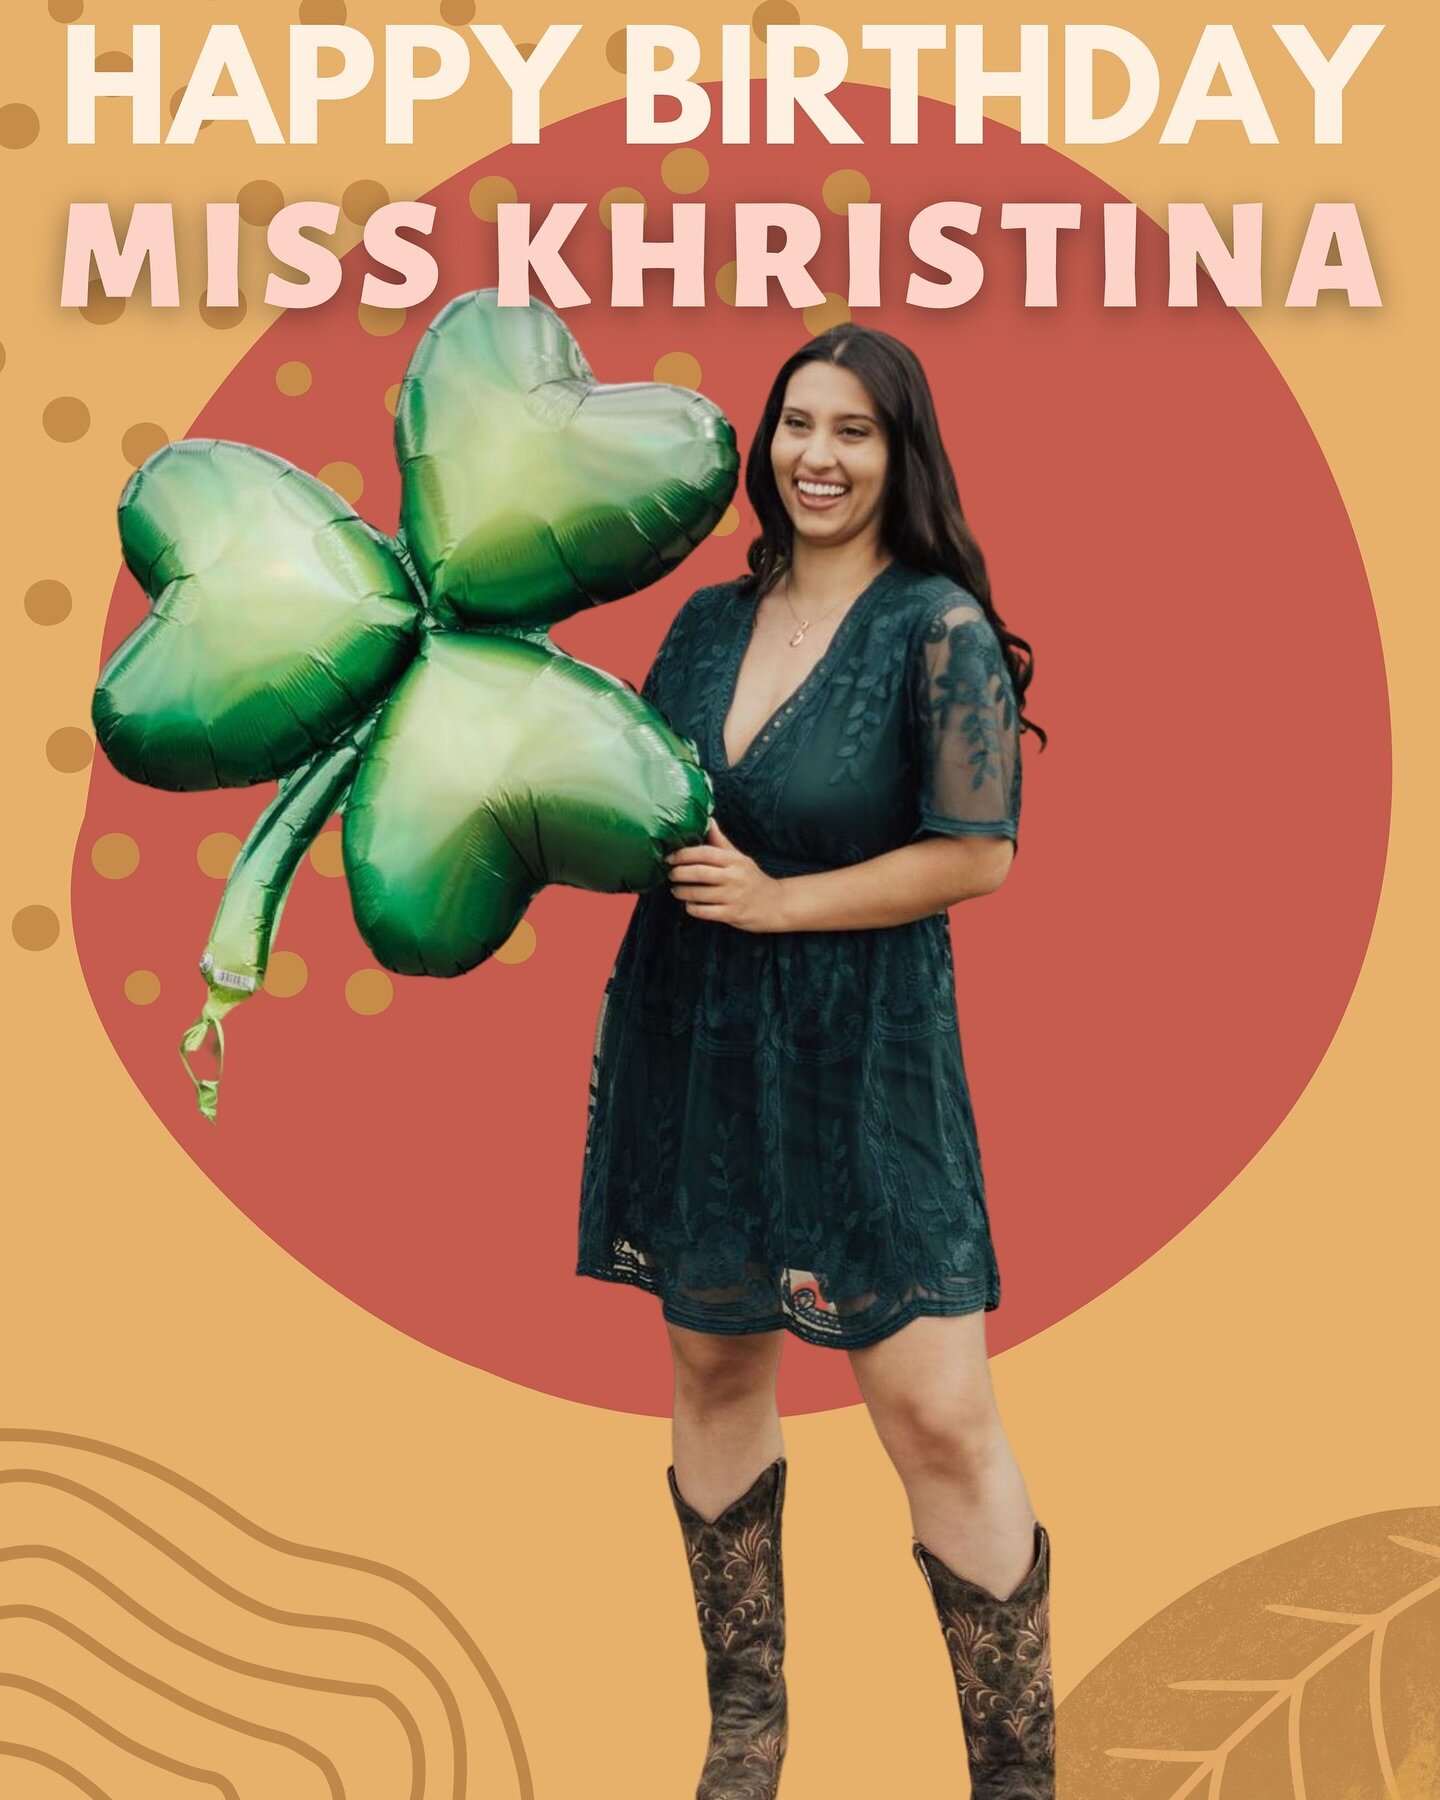 🎉 Happy Birthday to RAD&rsquo;s talented, creative, artistic, beautiful, loyal, and simply incredible Miss Khristina! 

🌟 You are loved &amp; admired by all at RAD! We hope you had an incredible birthday! 

❤️ Join us in wishing Miss Khristina a ve